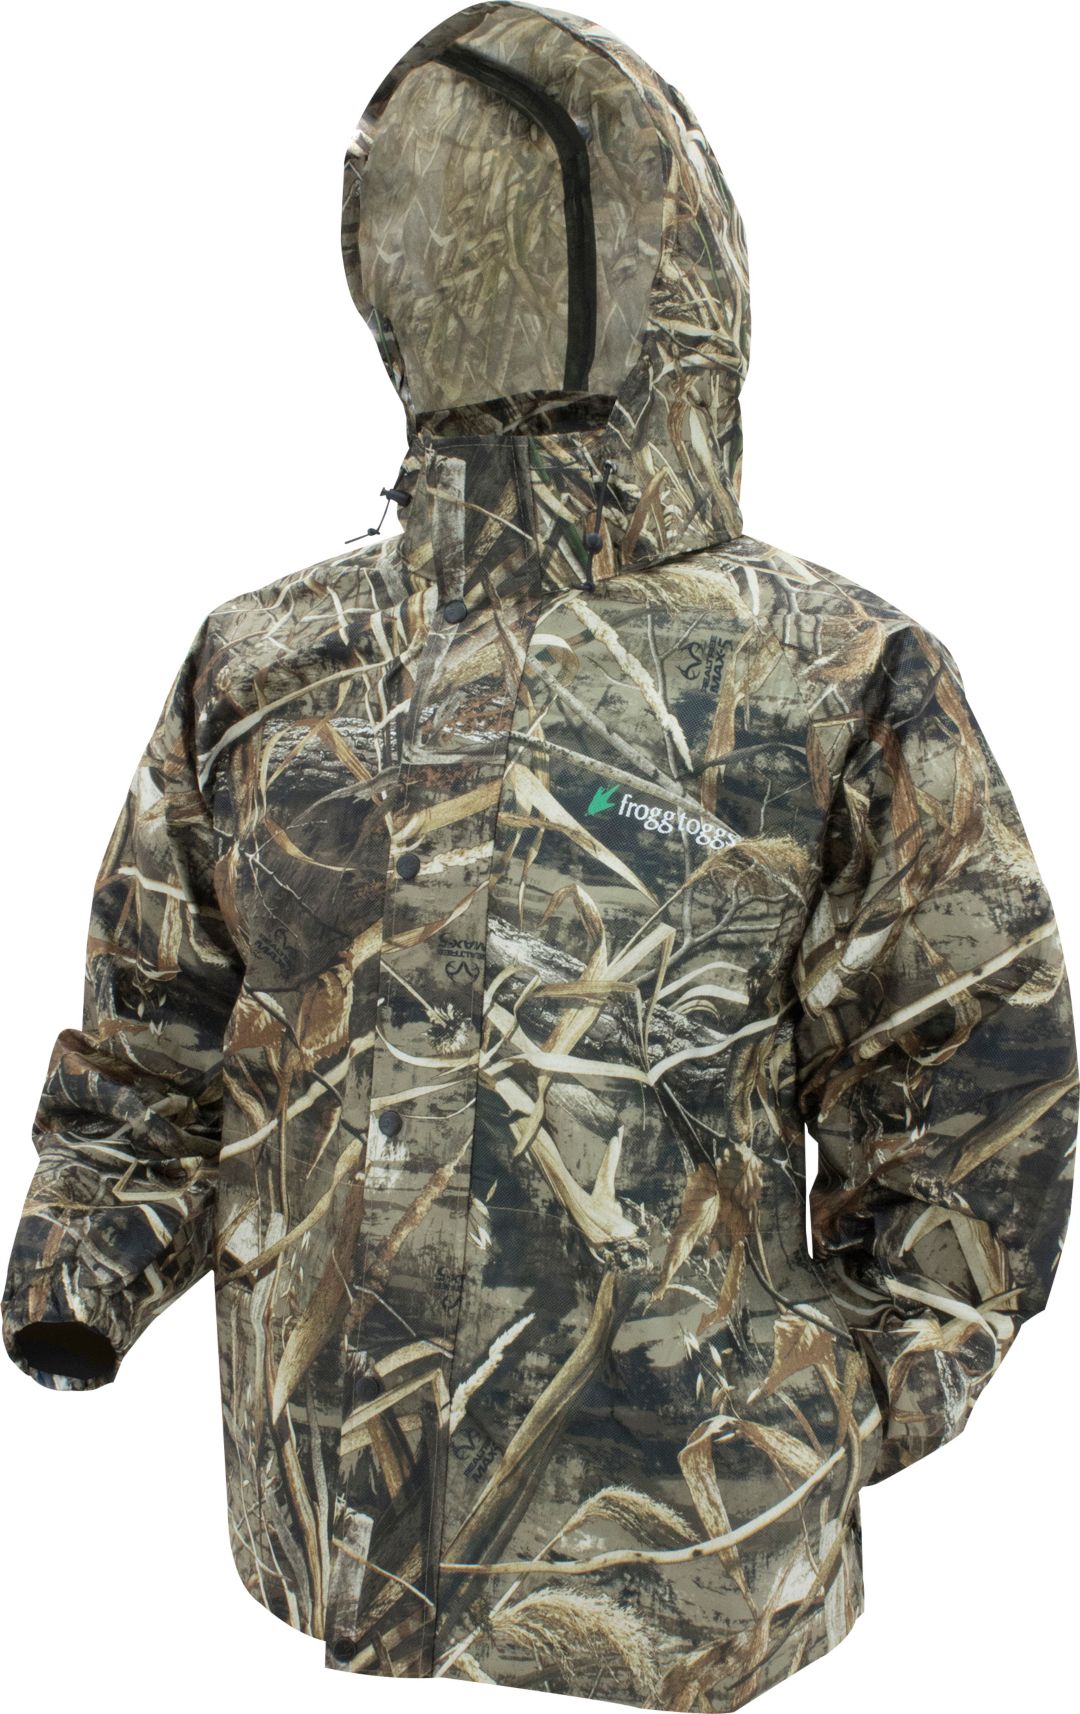 FROGG TOGGS Pro Action Jacket Pro Action Jacket